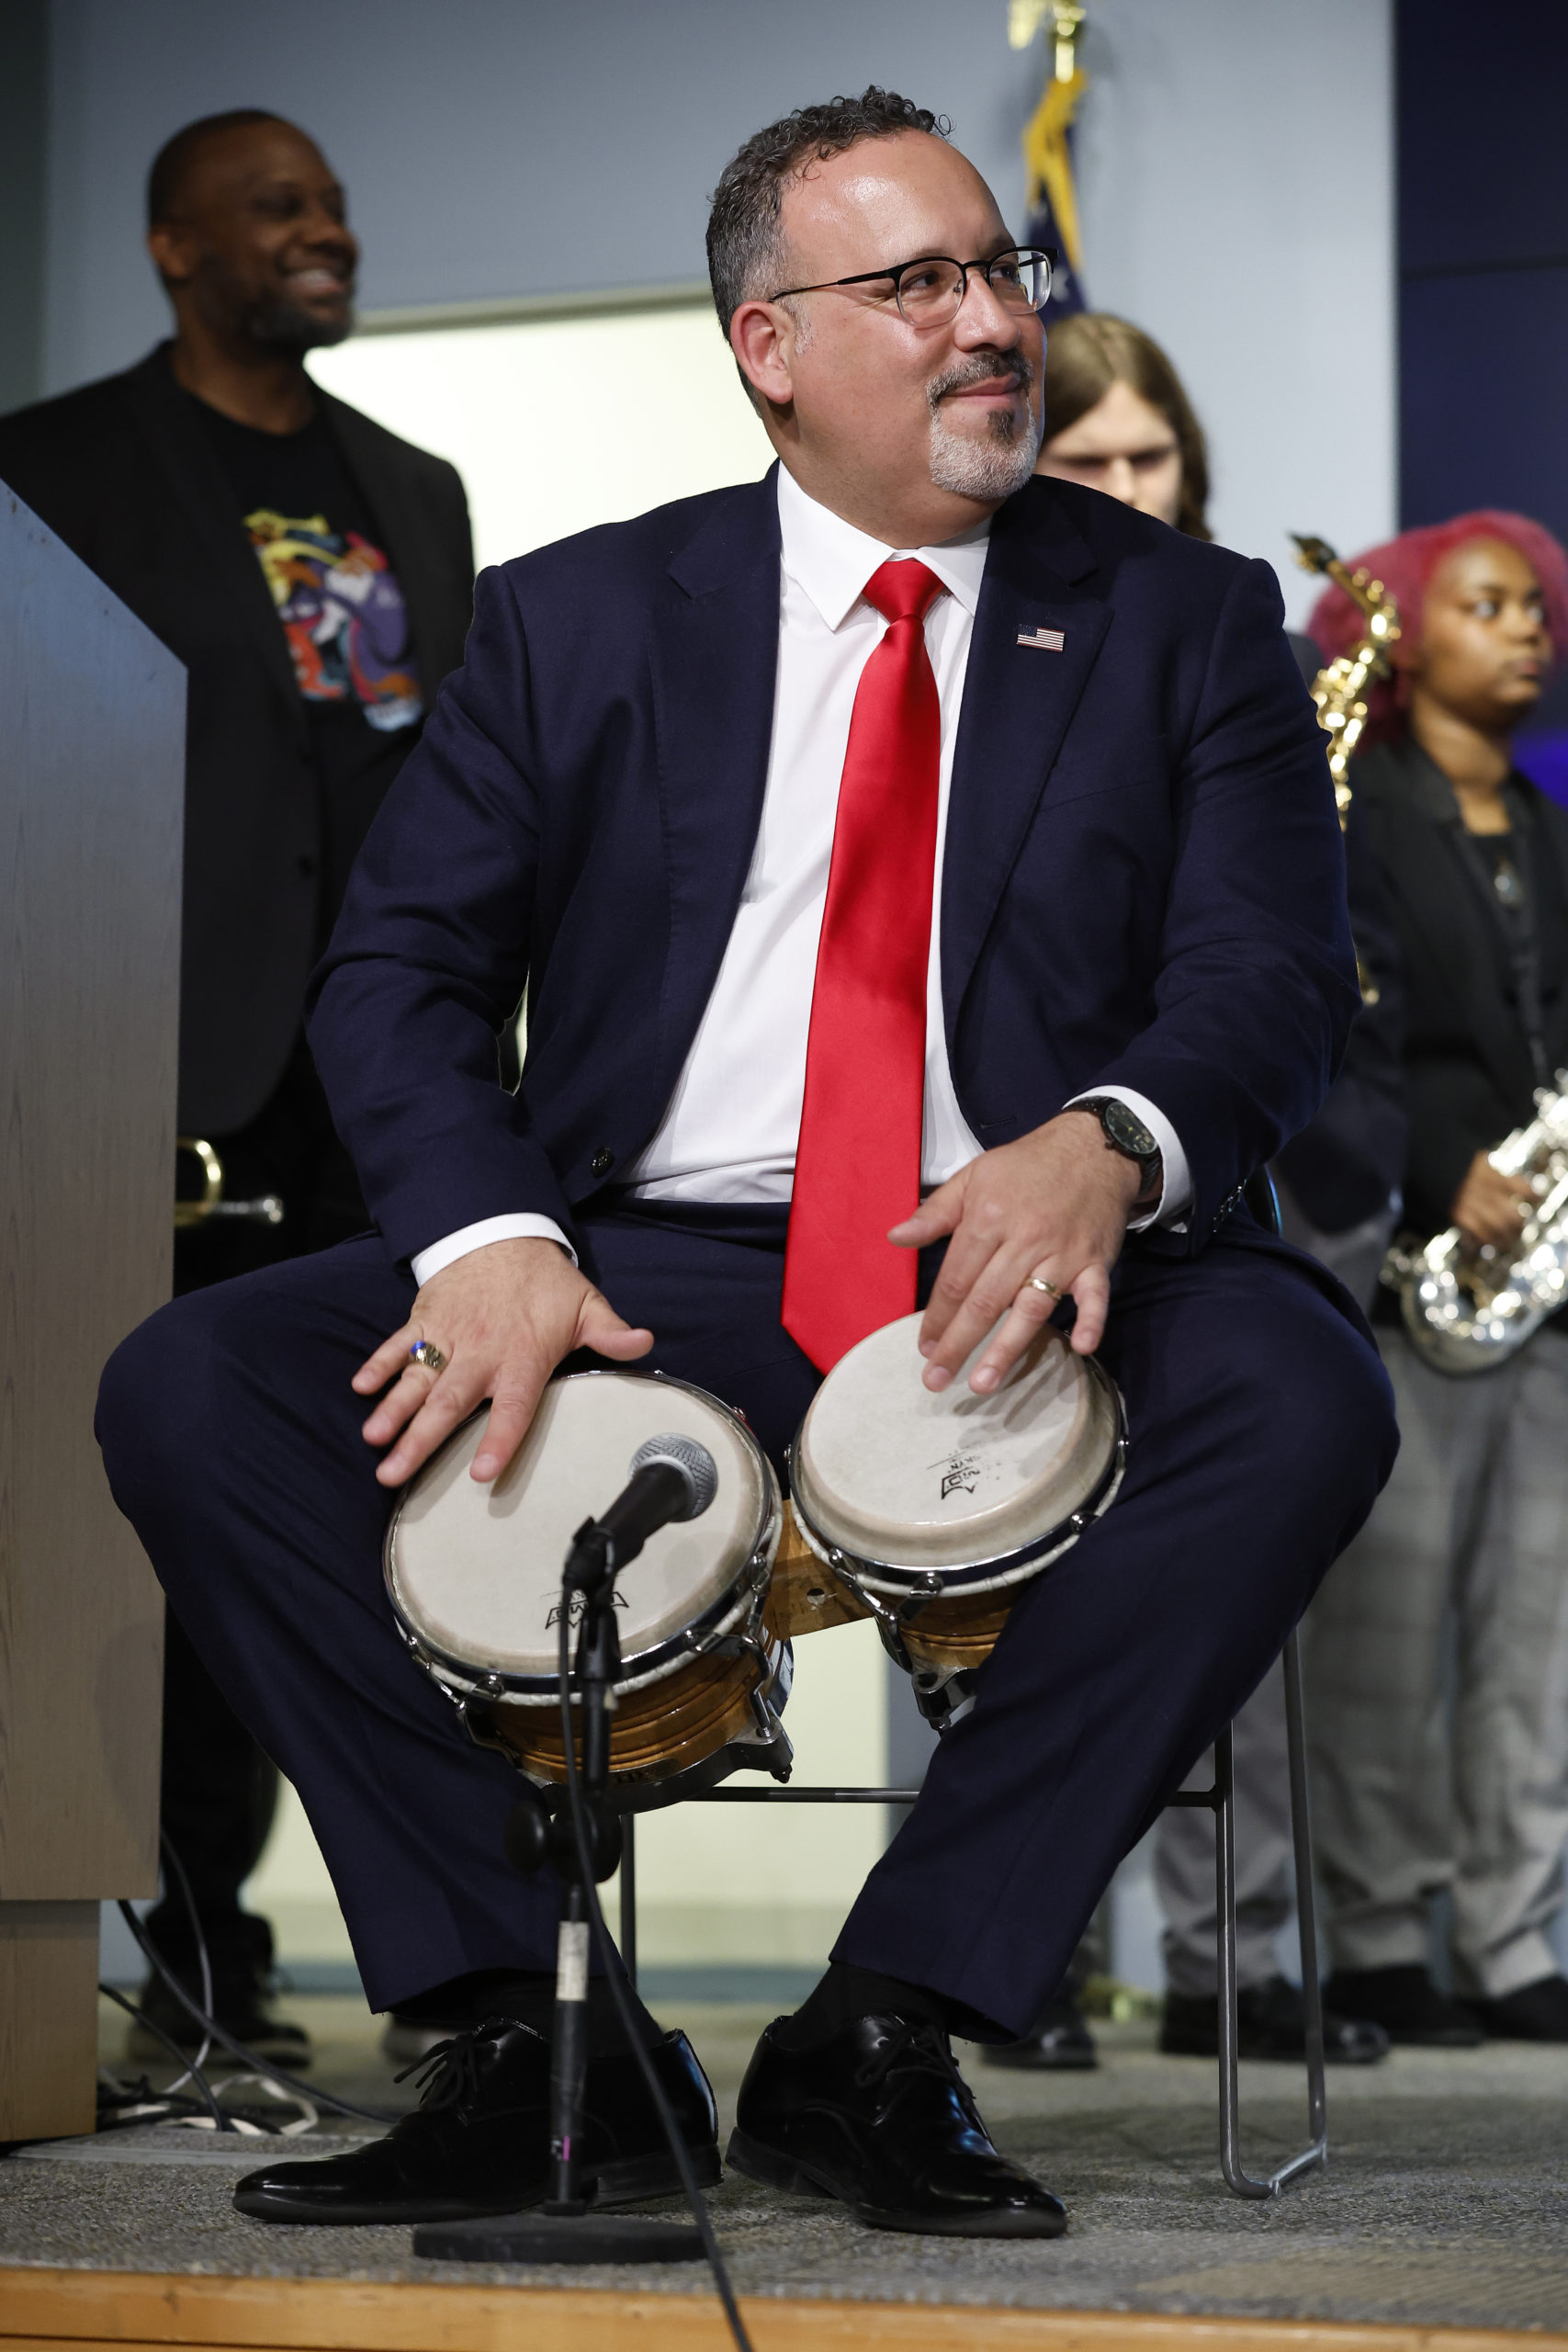 U.S. Education Secretary Miguel Cardona plays Latin percussion while performing with members of the high school-age Herbie Hancock Jazz Institute Peer-To-Peer Jazz Sextet at the department's Lyndon B. Johnson headquarters building on April 19, 2022 in Washington, DC. (Photo by Chip Somodevilla/Getty Images)